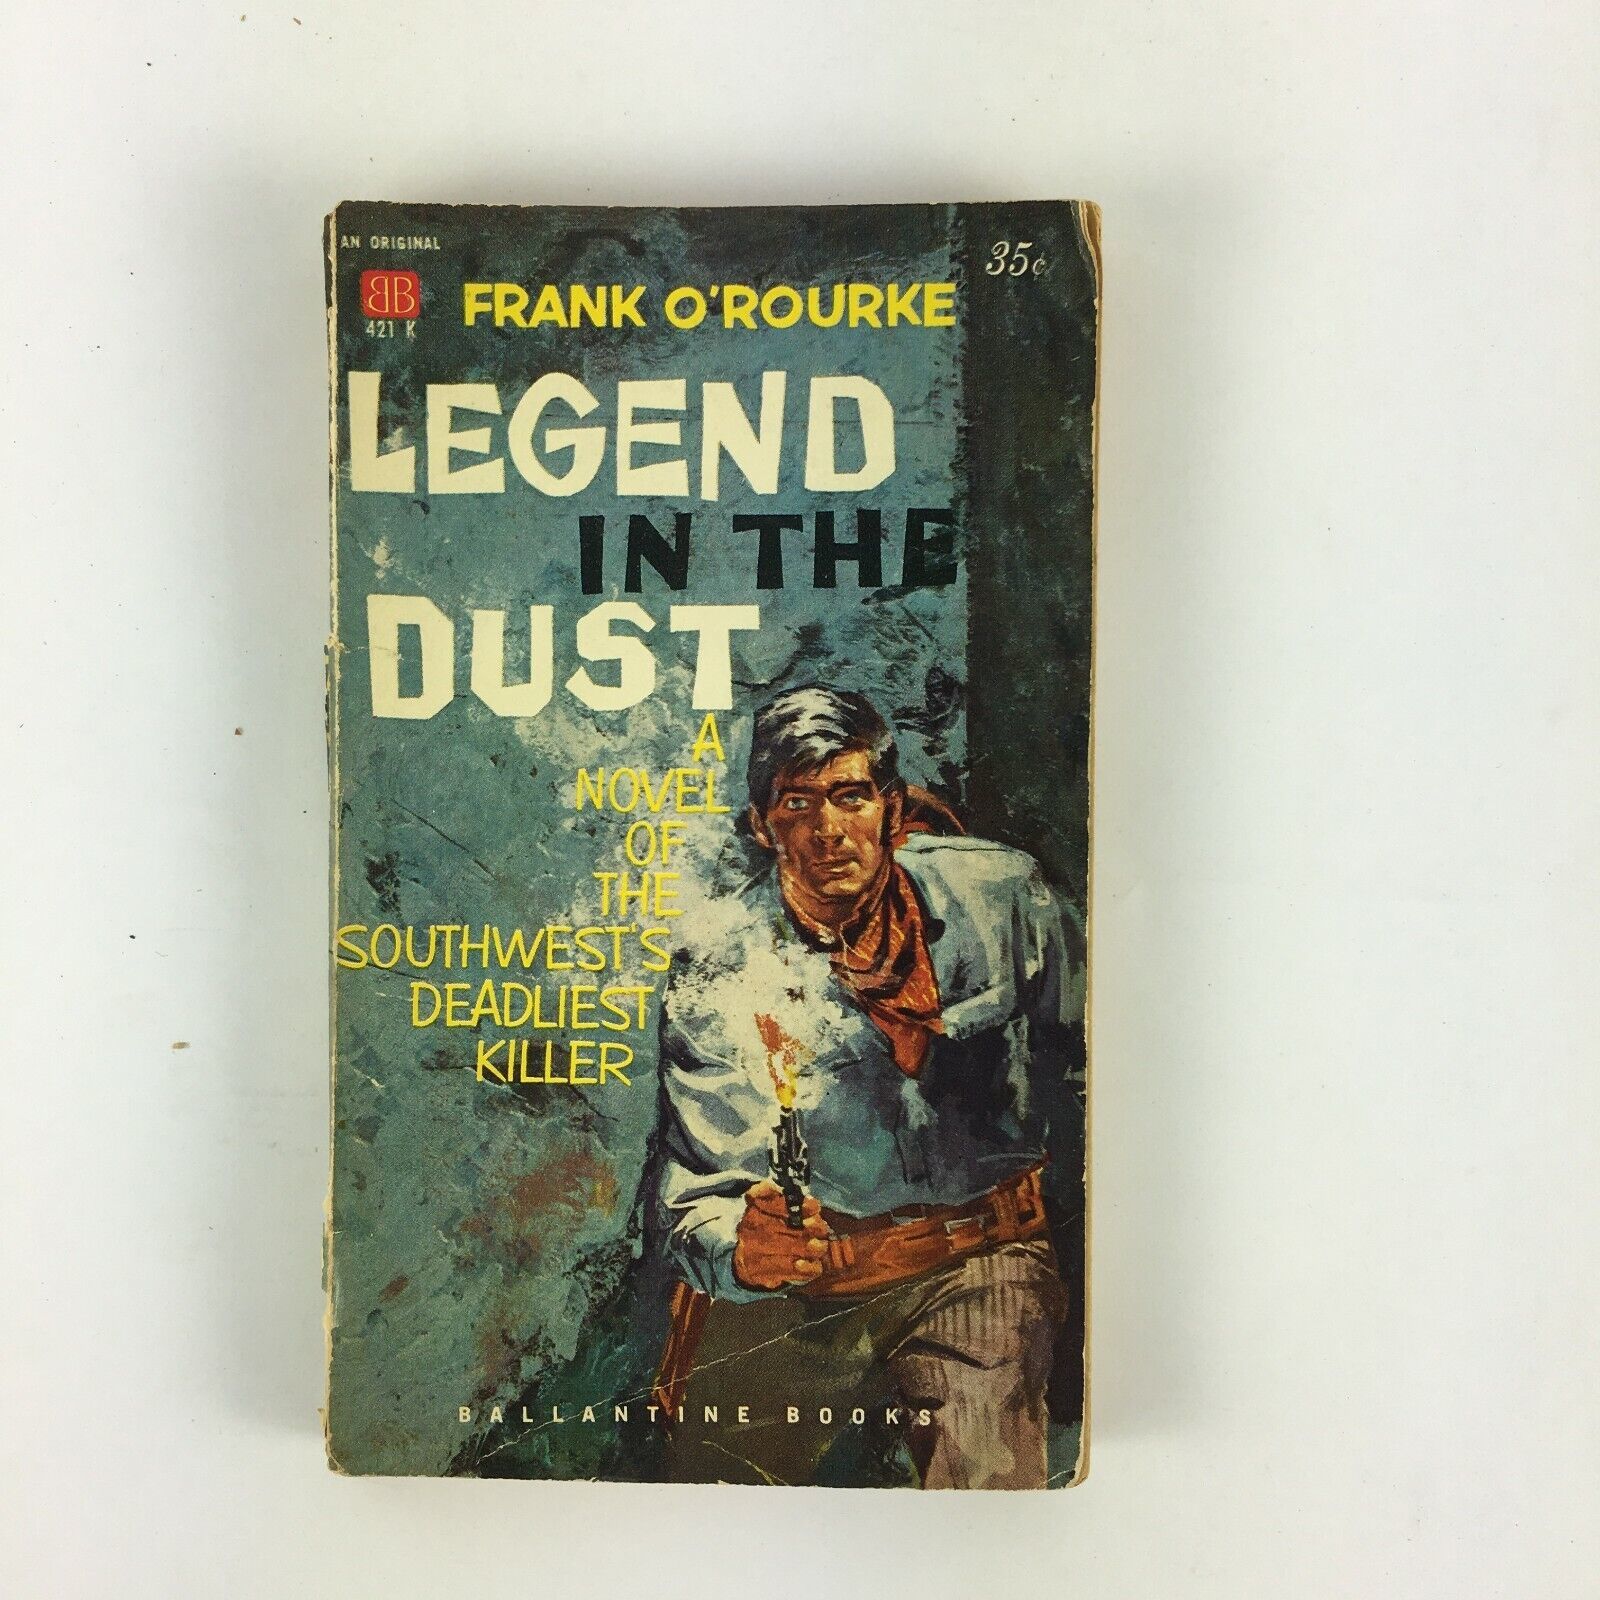 Primary image for Frank O'Rourke Legend in the Dust A Novel of the Southwests Deadliest Killer